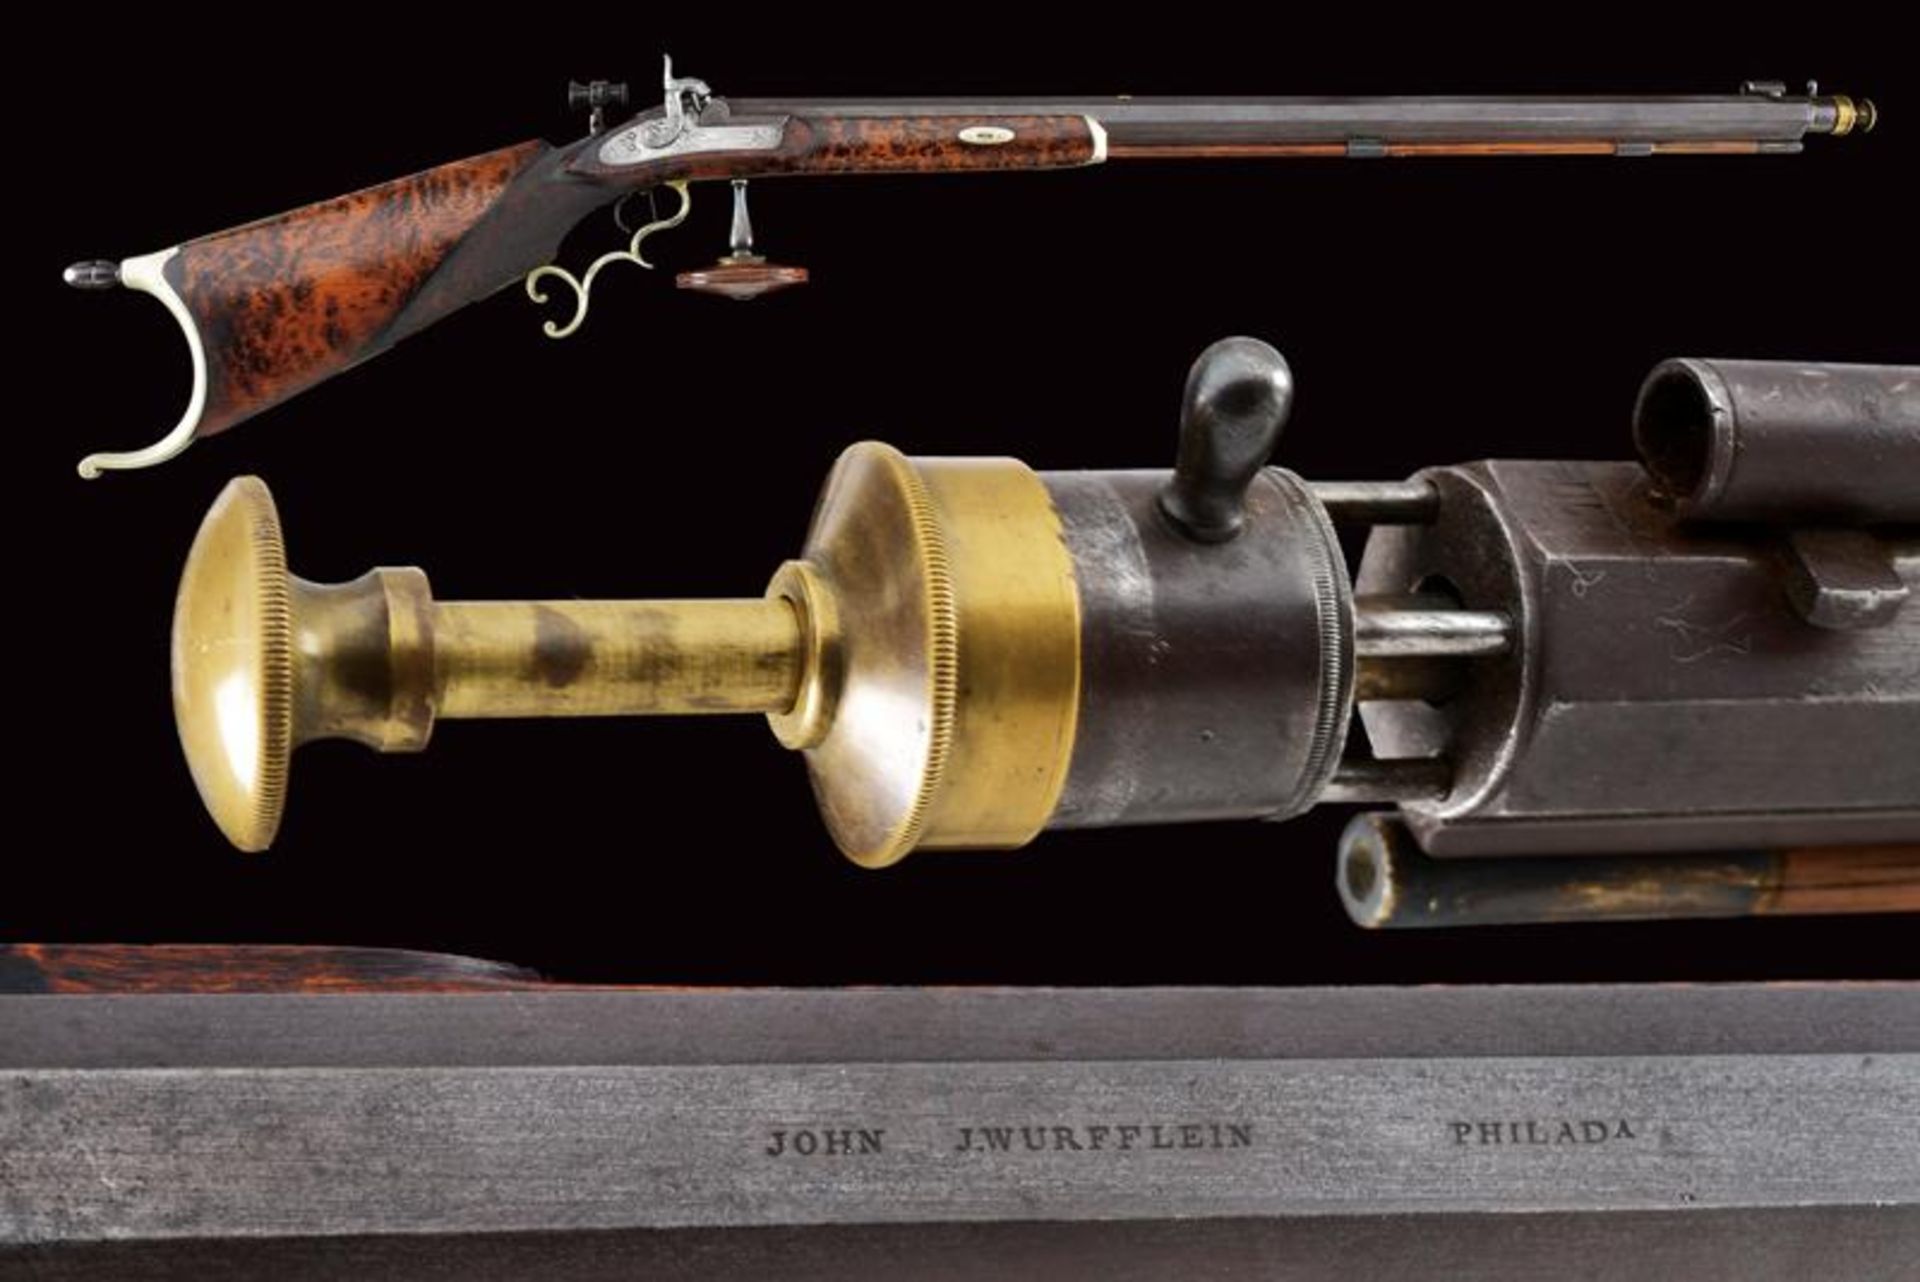 An elegant percussion target carbine by John J. Wurfflein with accessories